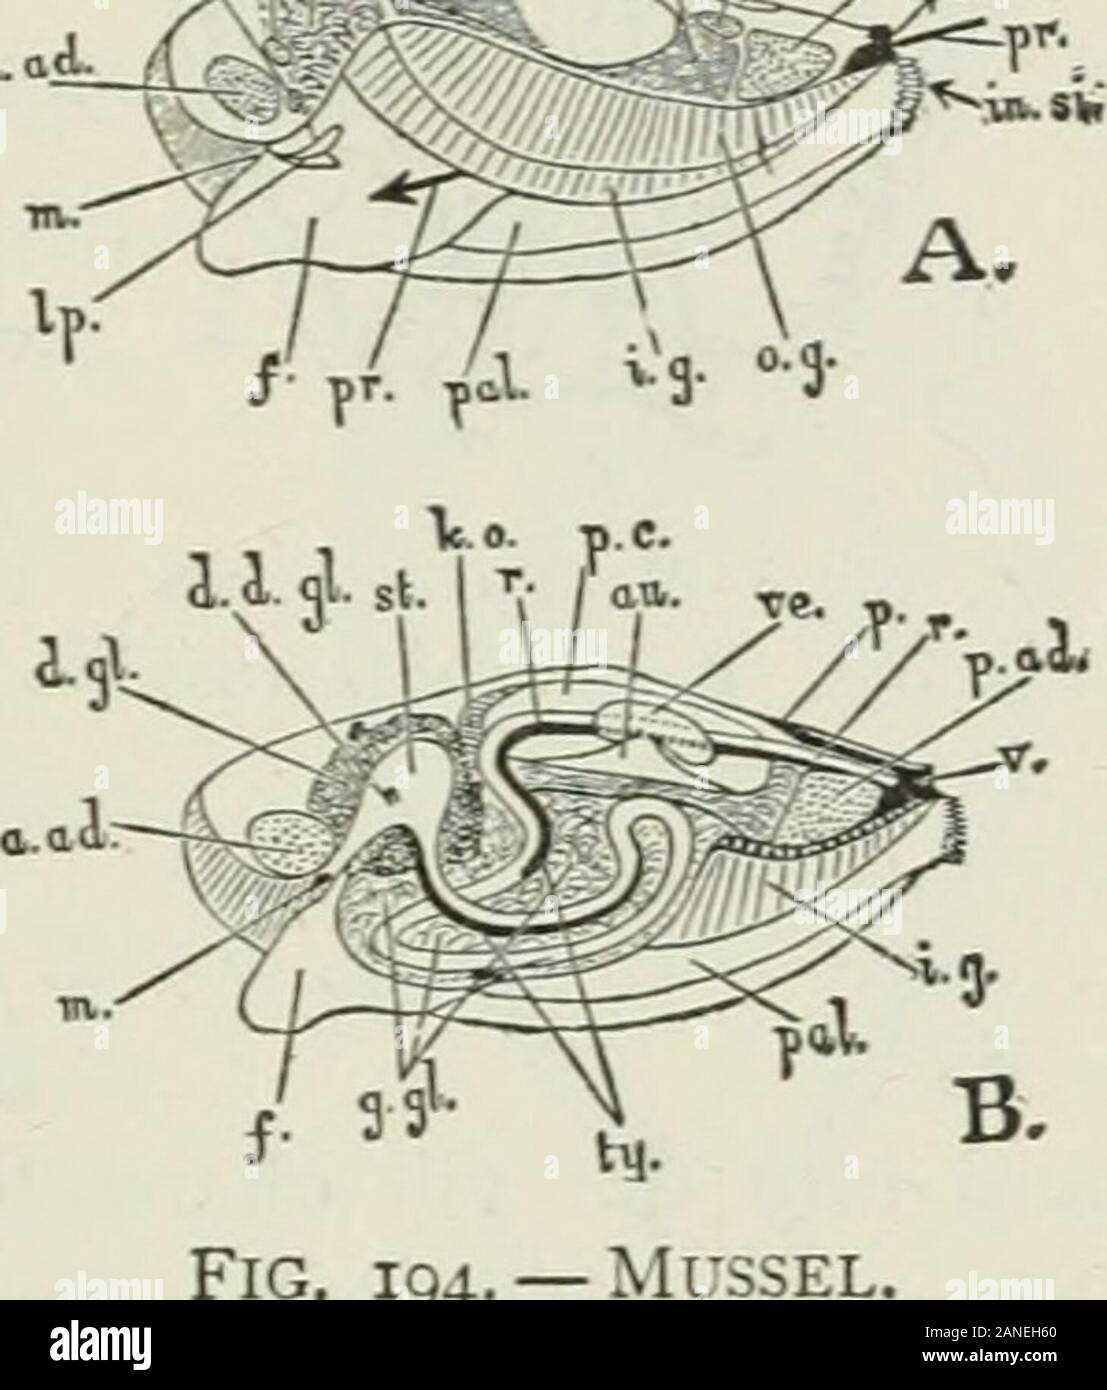 Beginners' zoology . Fig. 193. — Anatomy of Mussel. (Beddard.) MOLLUSCS lOI chamber for the gills is made by the joining of the mantleflaps below, along the ventral line. The mantle edges areseparated at two places, leaving openings called cxJialejitand inhaleJit sipJions. Fresh water with its oxygen, propelled by cilia at theopening and on the gills, enters through the lower orinhalent siphon, passes between the gills, and goes to anupper passage, leaving the gill chamber by a slit whichseparates the gills from the foot. ?X^. For this passage, see arrow(Fig, 194). The movement ofthe water is Stock Photo